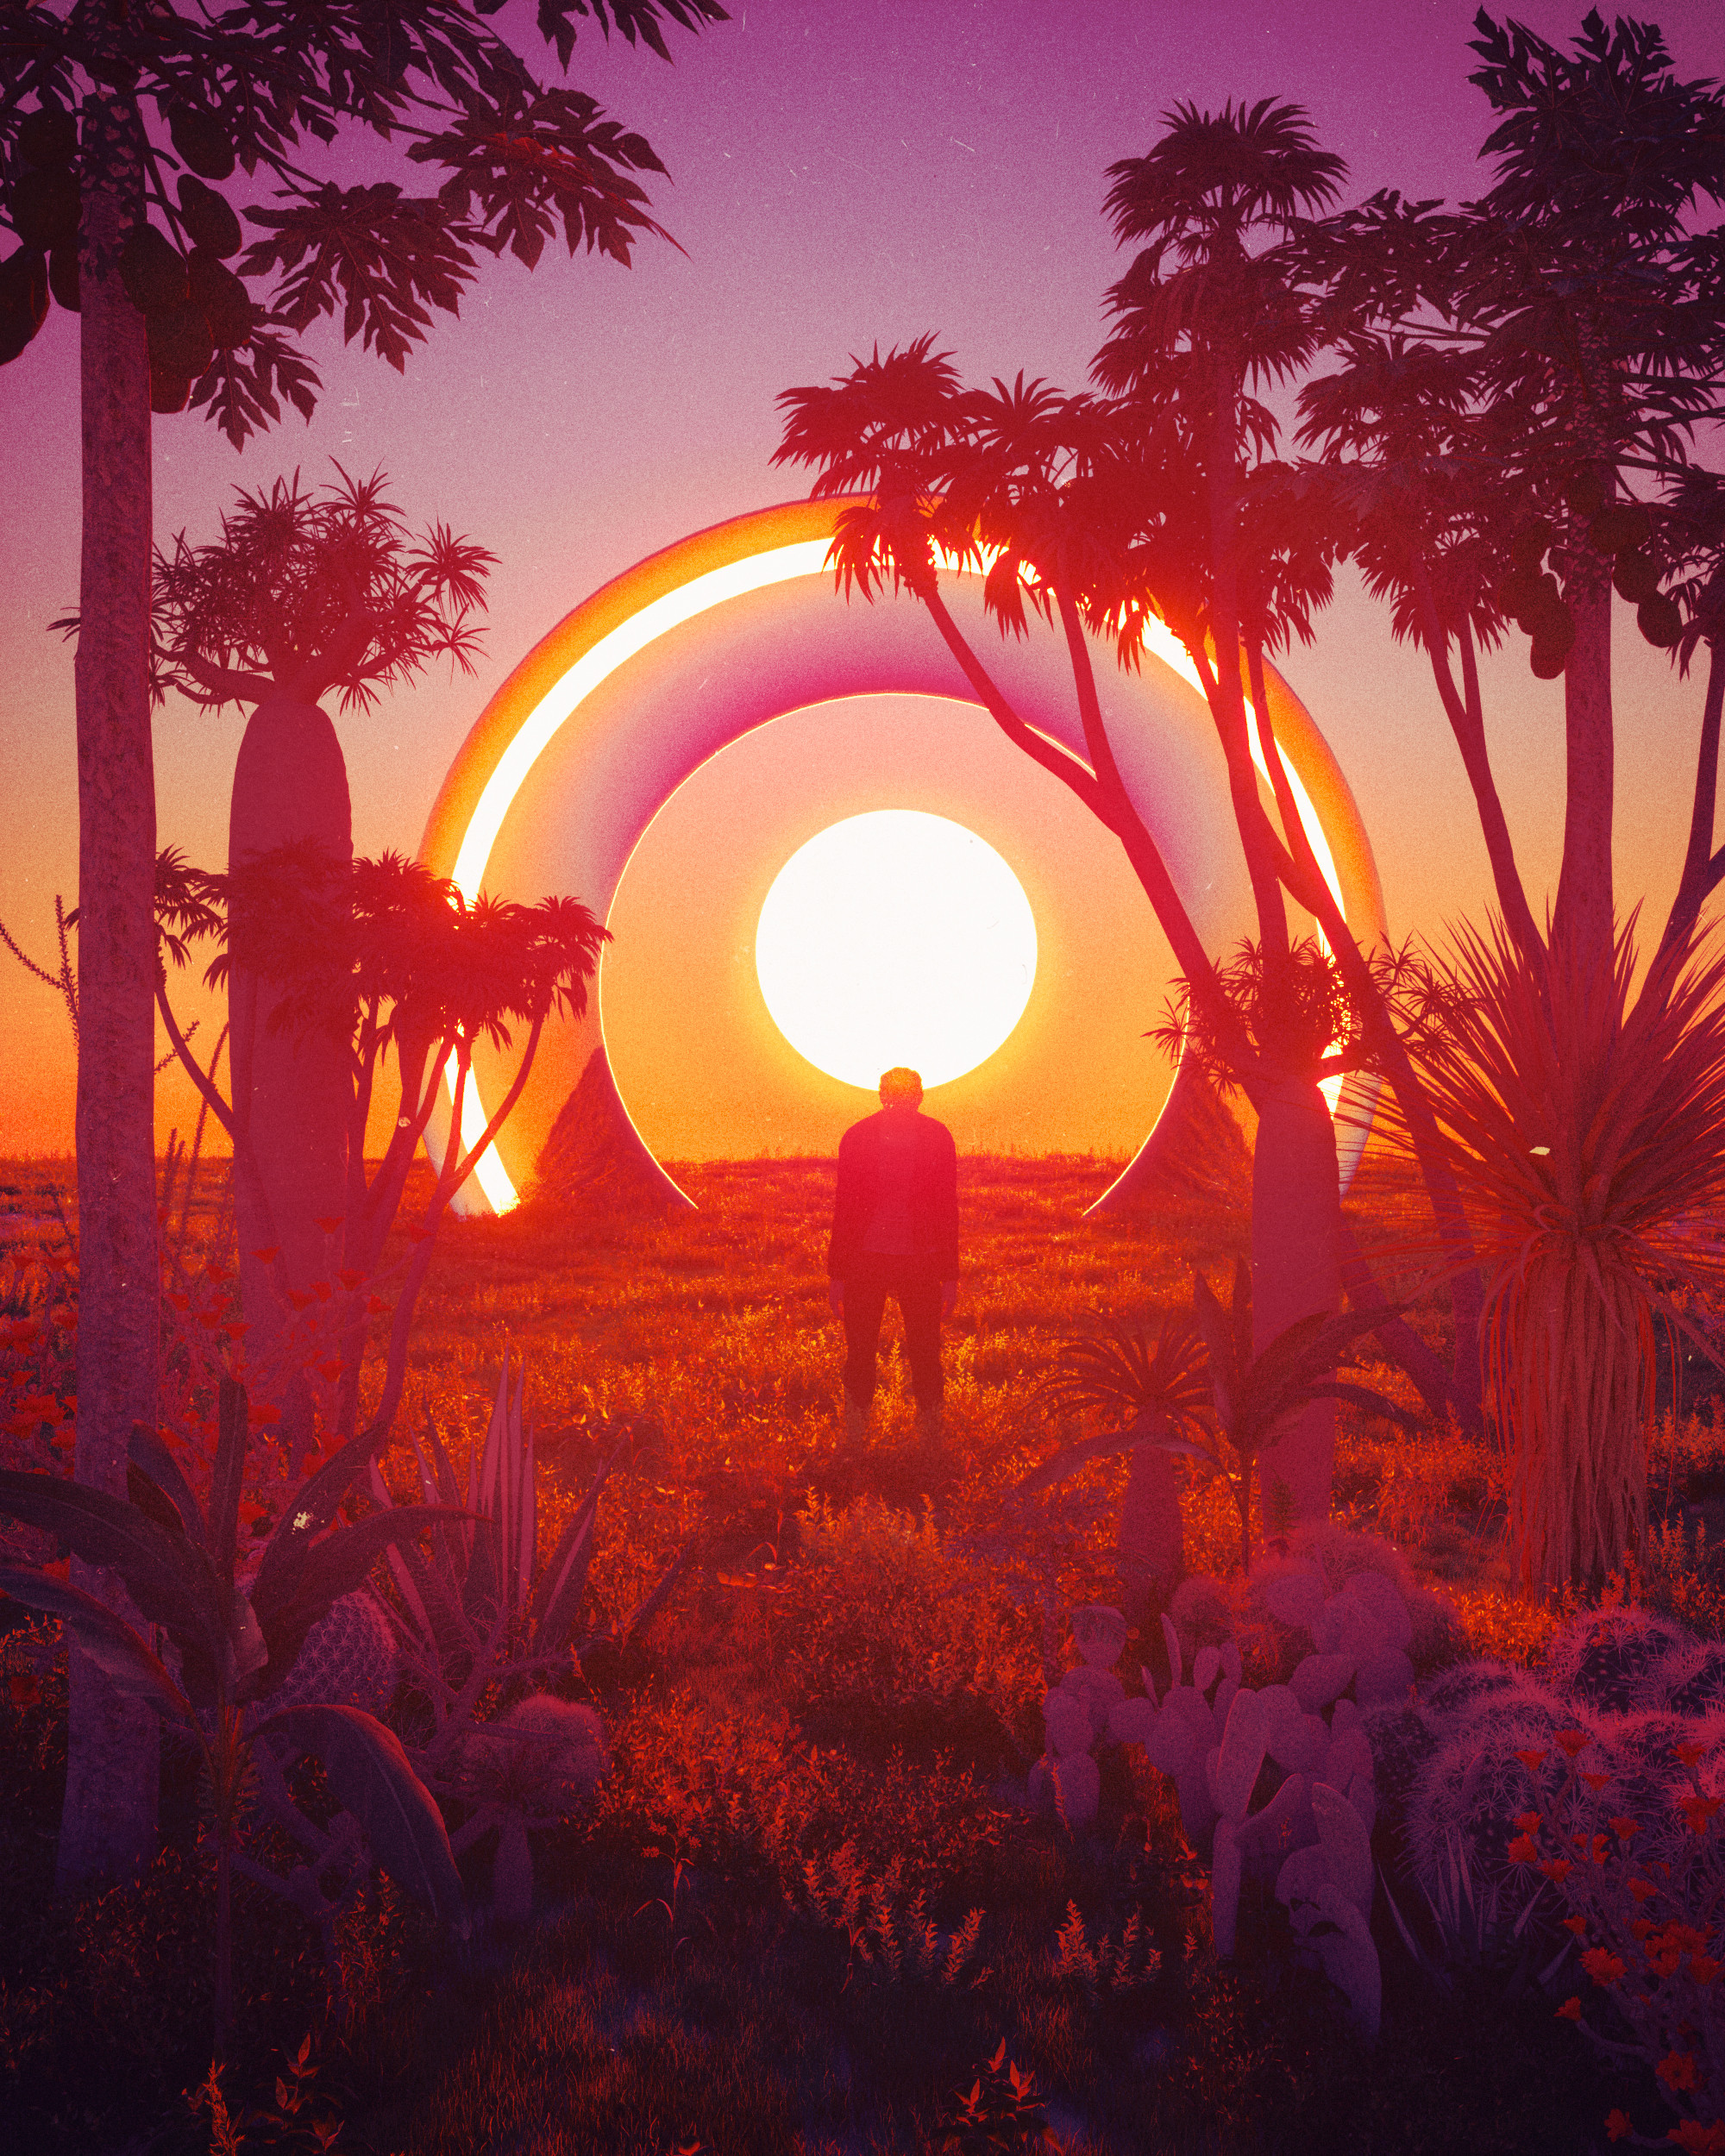 FLAT EARTH SUNSET by beeple at ArtStation